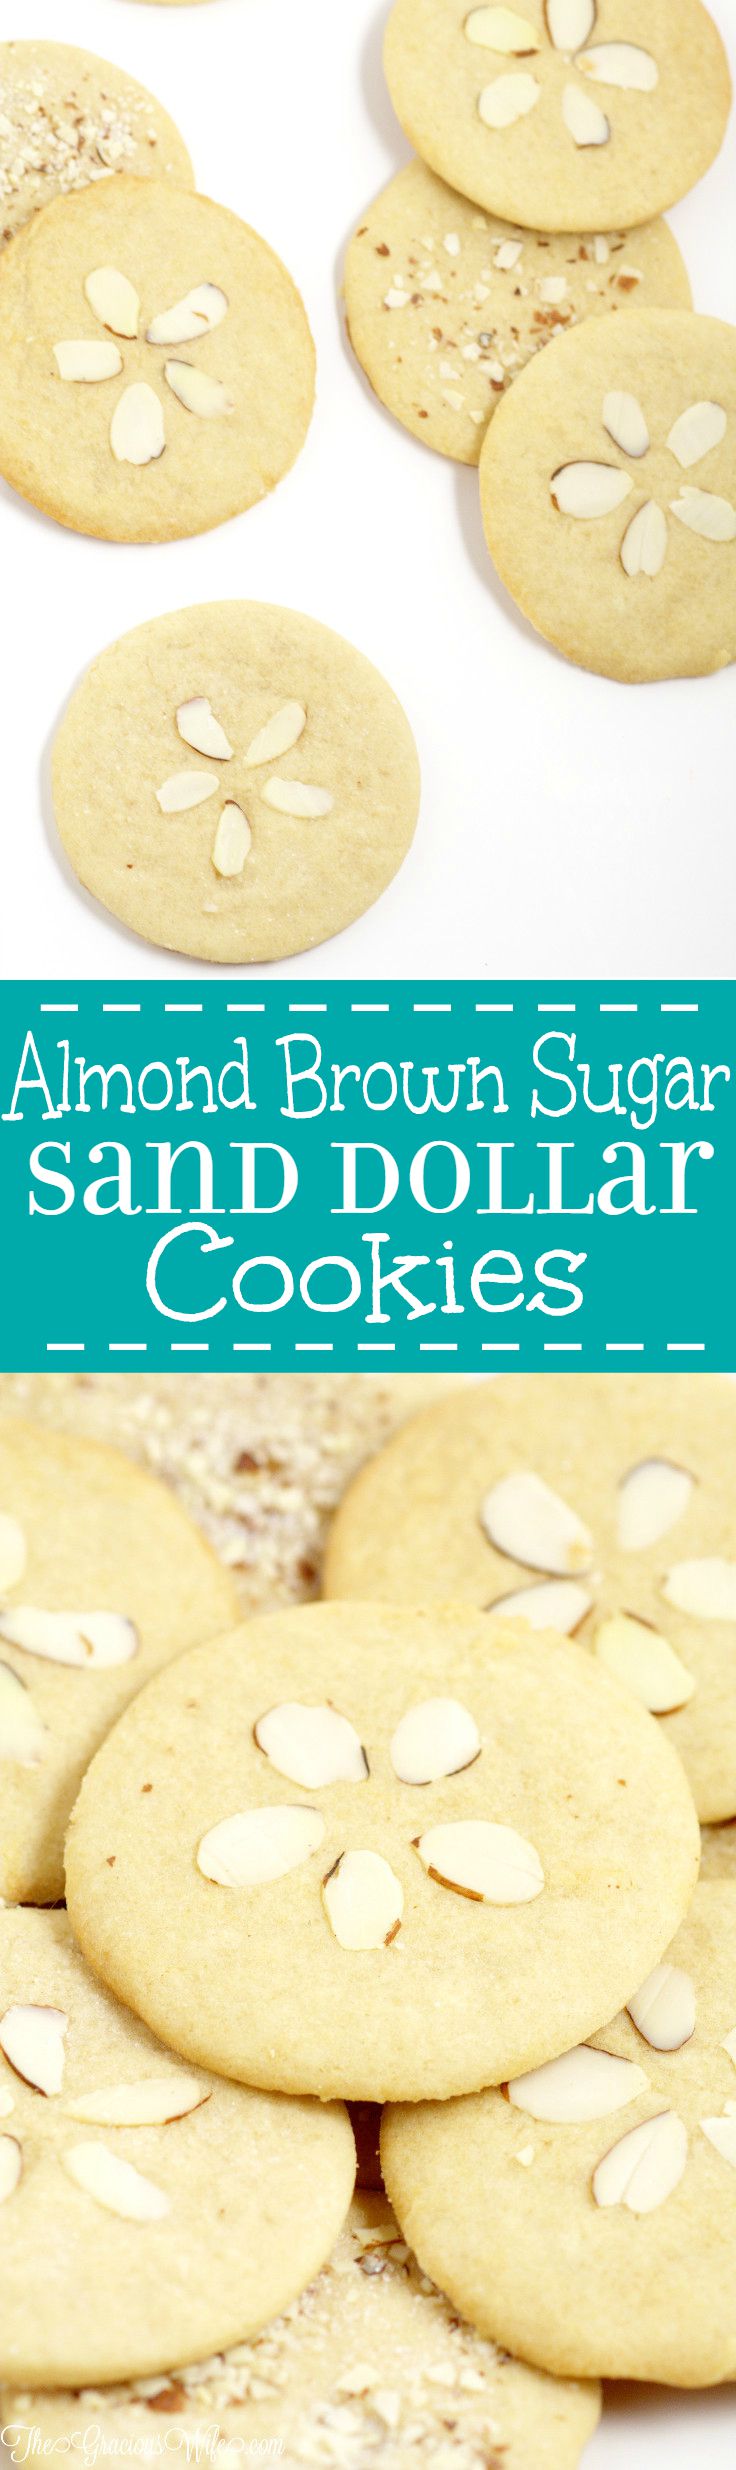 Almond Brown Sugar Sand Dollar Cookies Recipe - an easy cookies recipe from scratch. These are just like sugar cookies, only better!